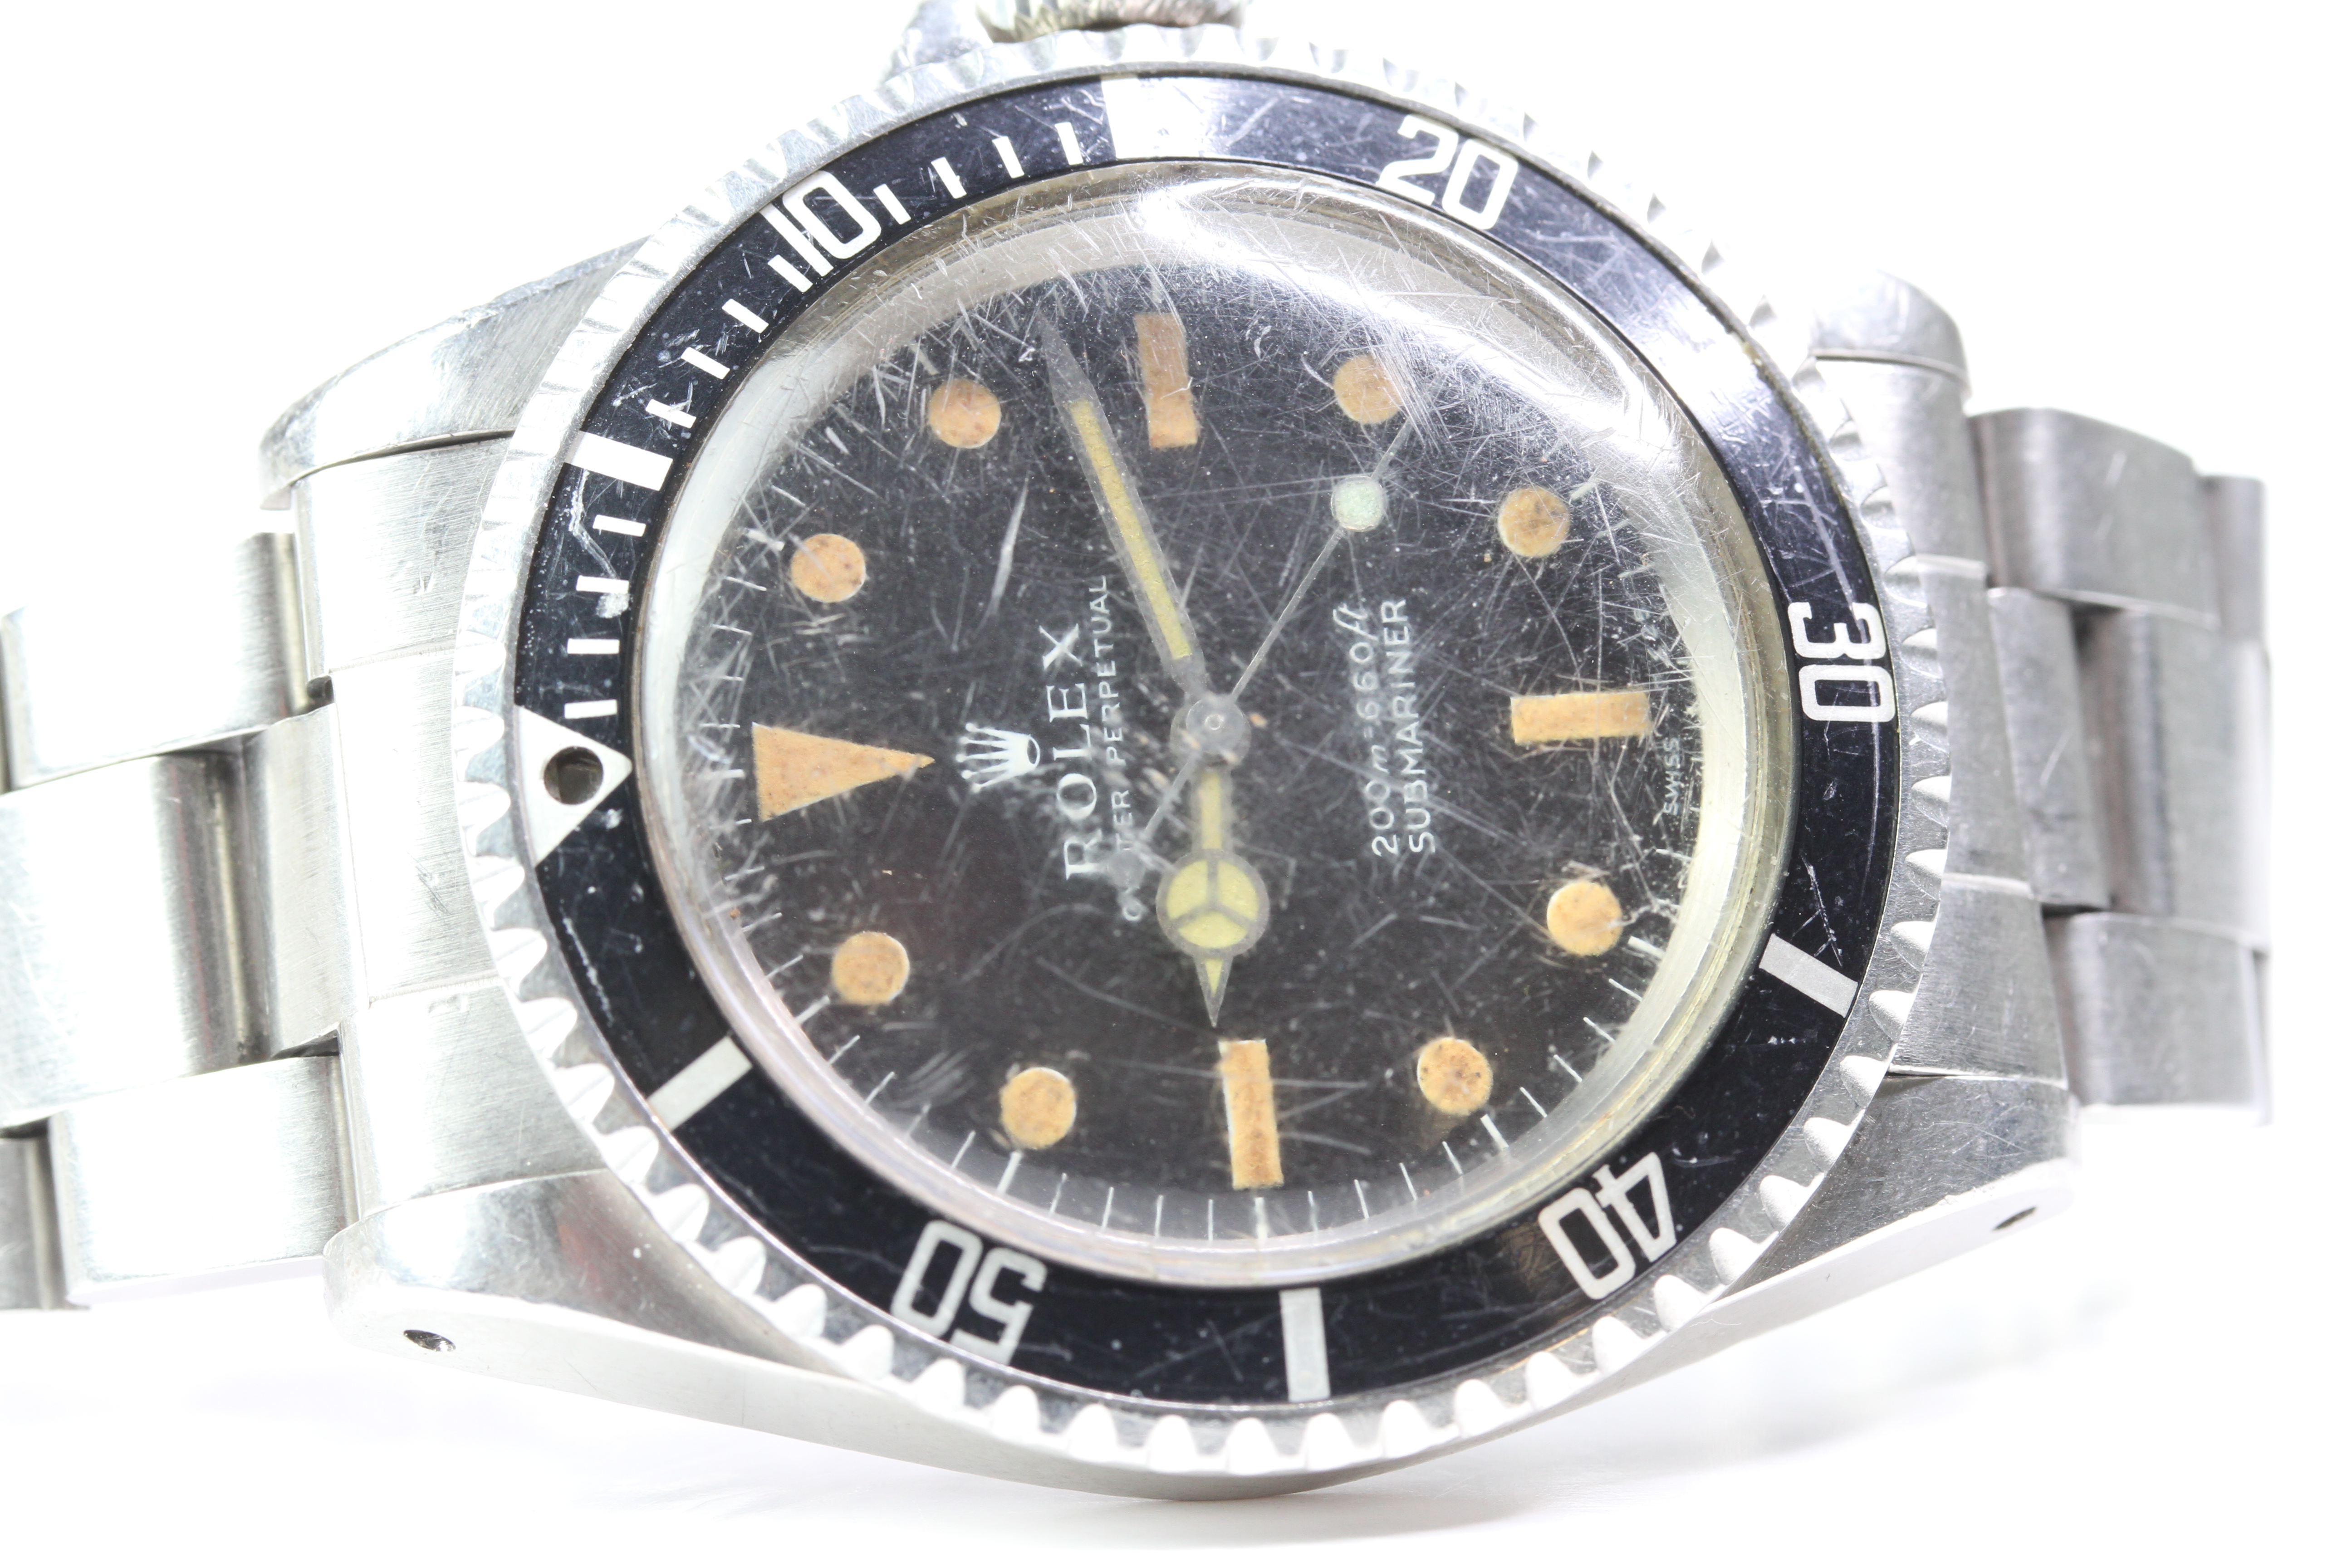 VINTAGE ROLEX SUBMARINER REFERENCE 5513 CIRCA 1972 - Image 3 of 7